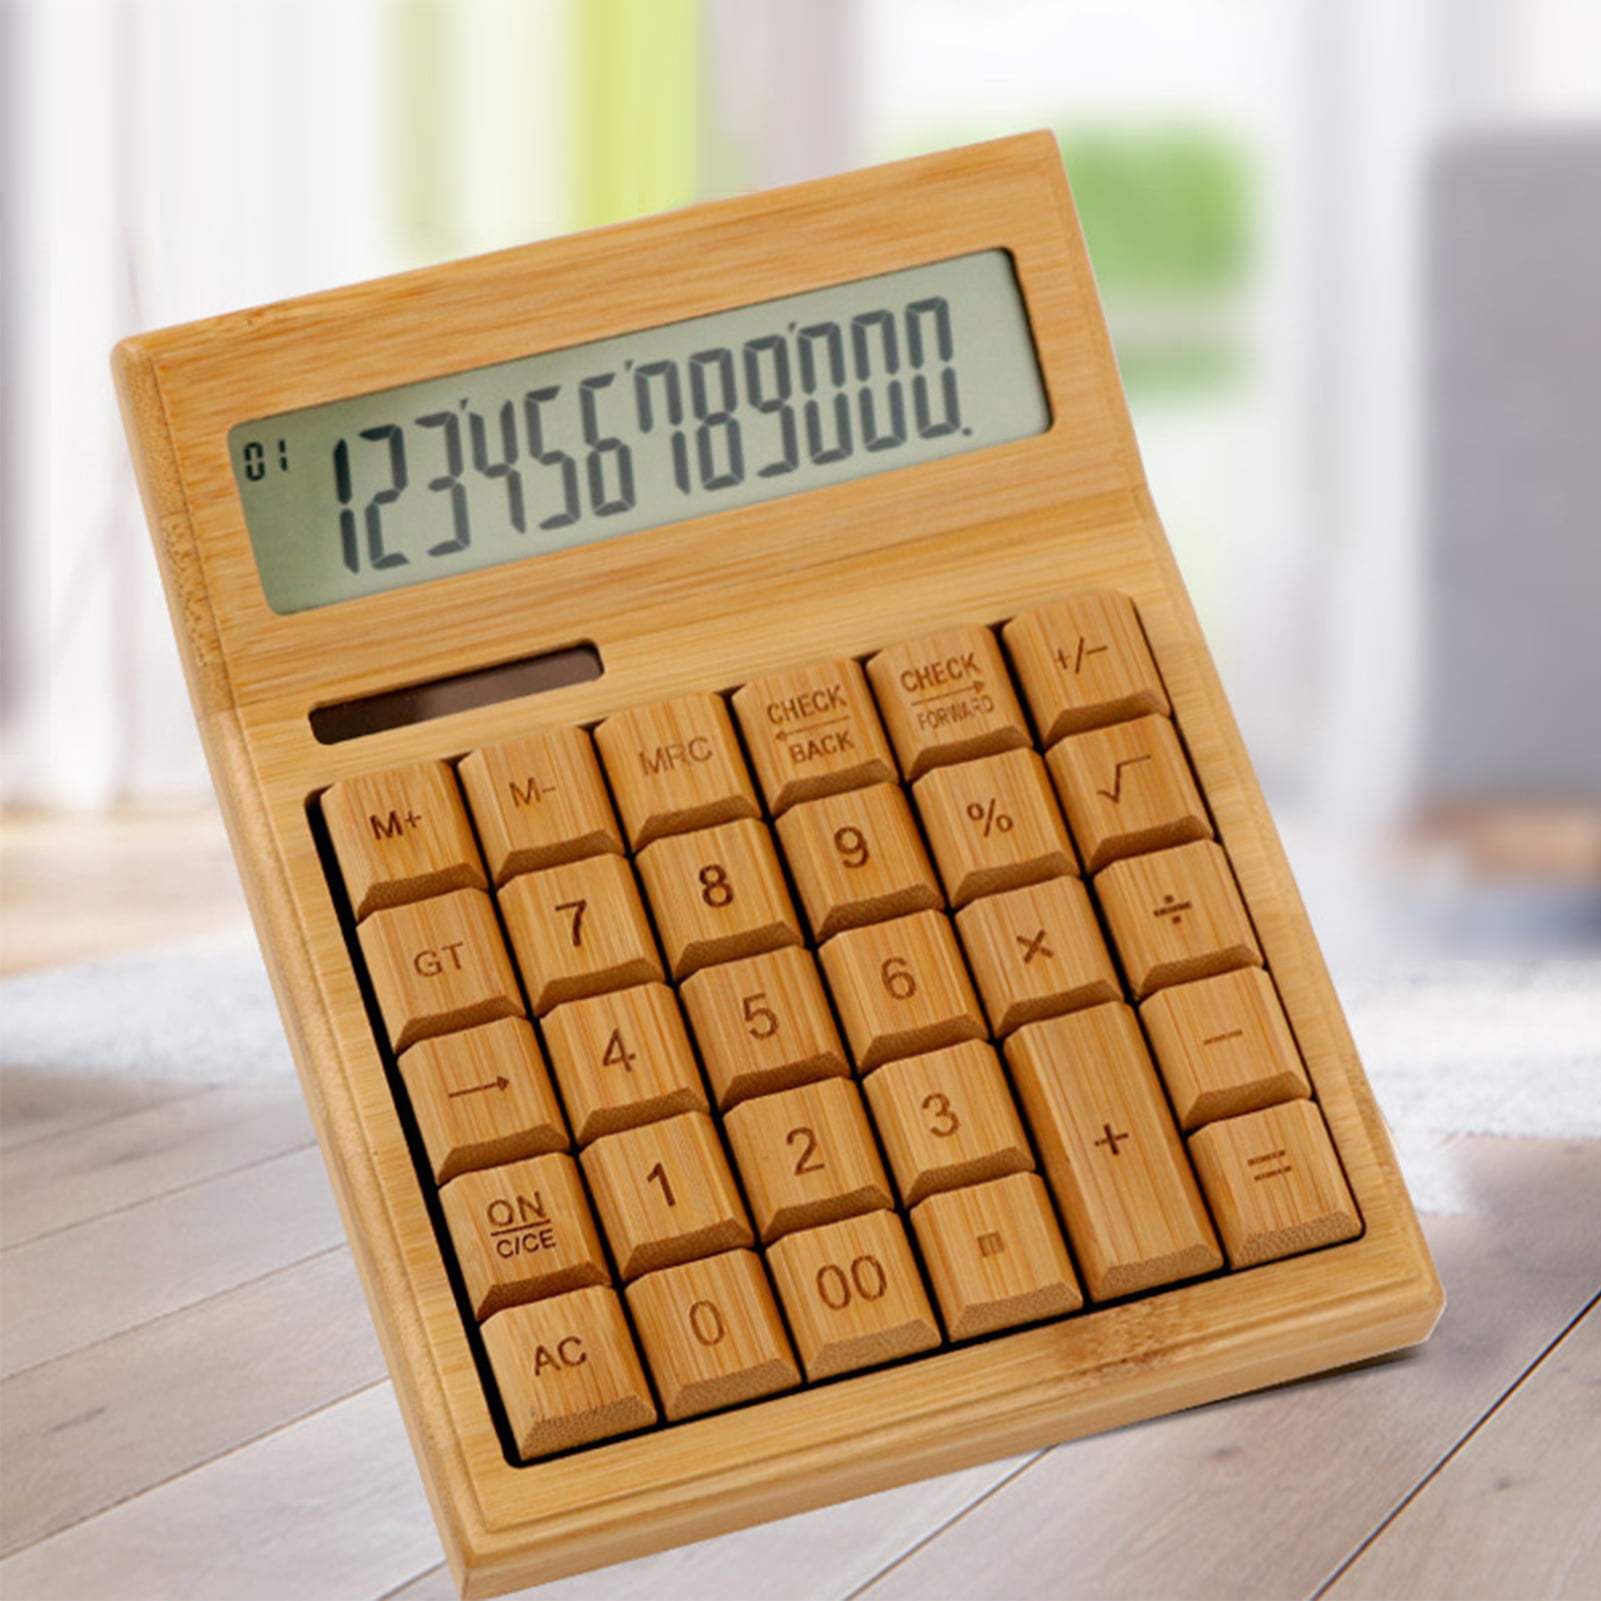 Bamboo Wood Solar Powered School Office Calculator With 12 Digit LCD Display 